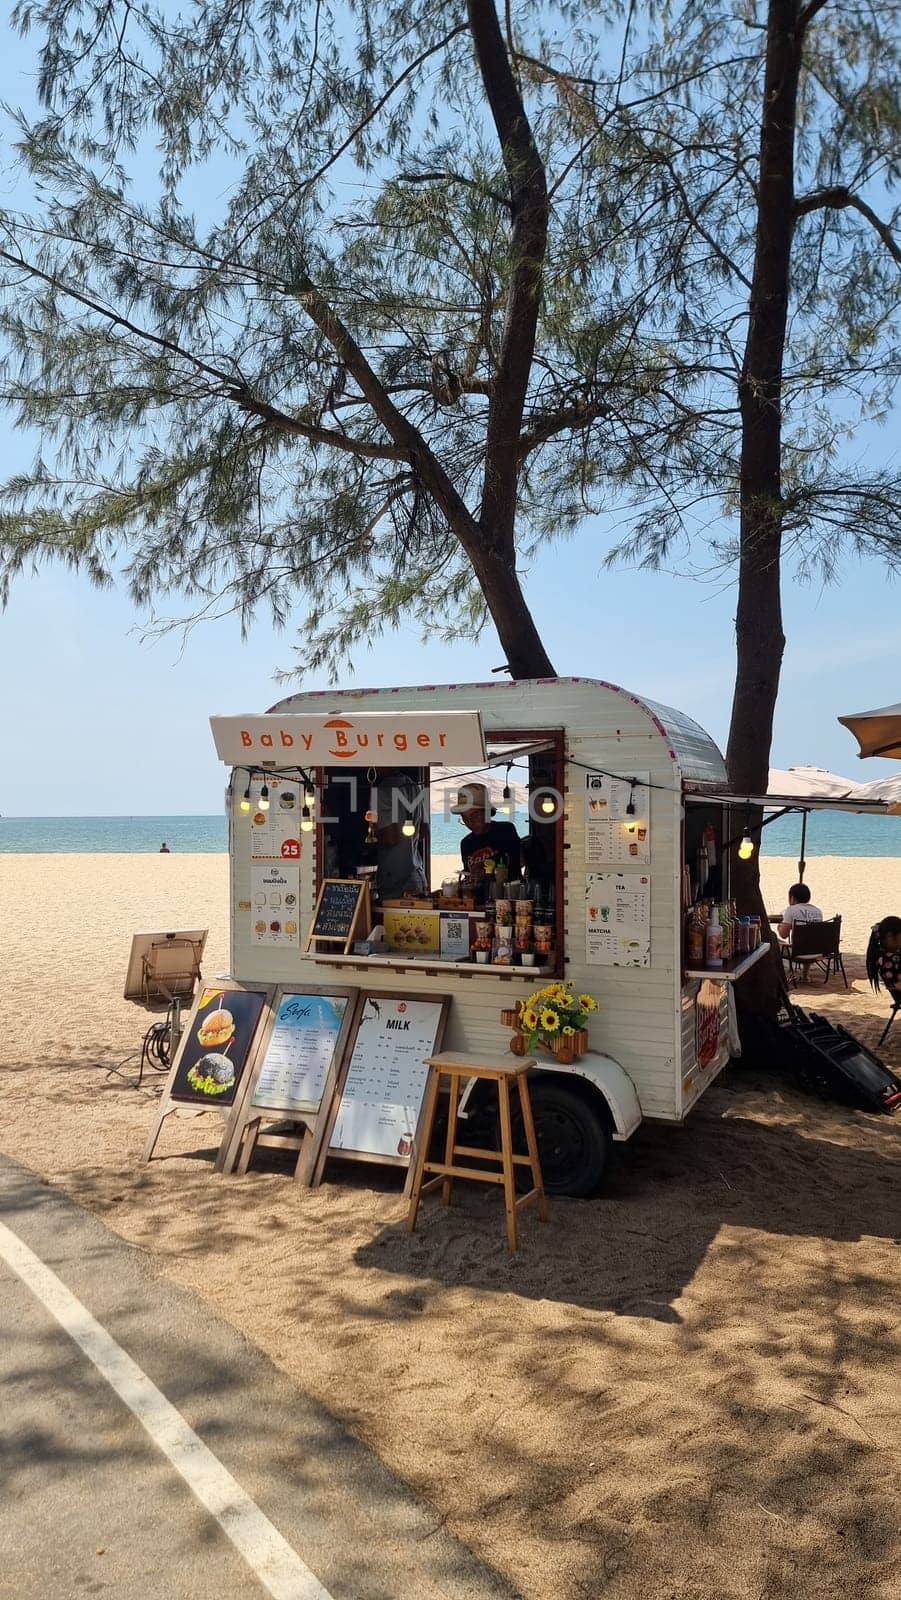 A vibrant food truck is parked on a sandy beach next to a lush tree, serving up delicious treats to beachgoers under the clear blue sky by fokkebok